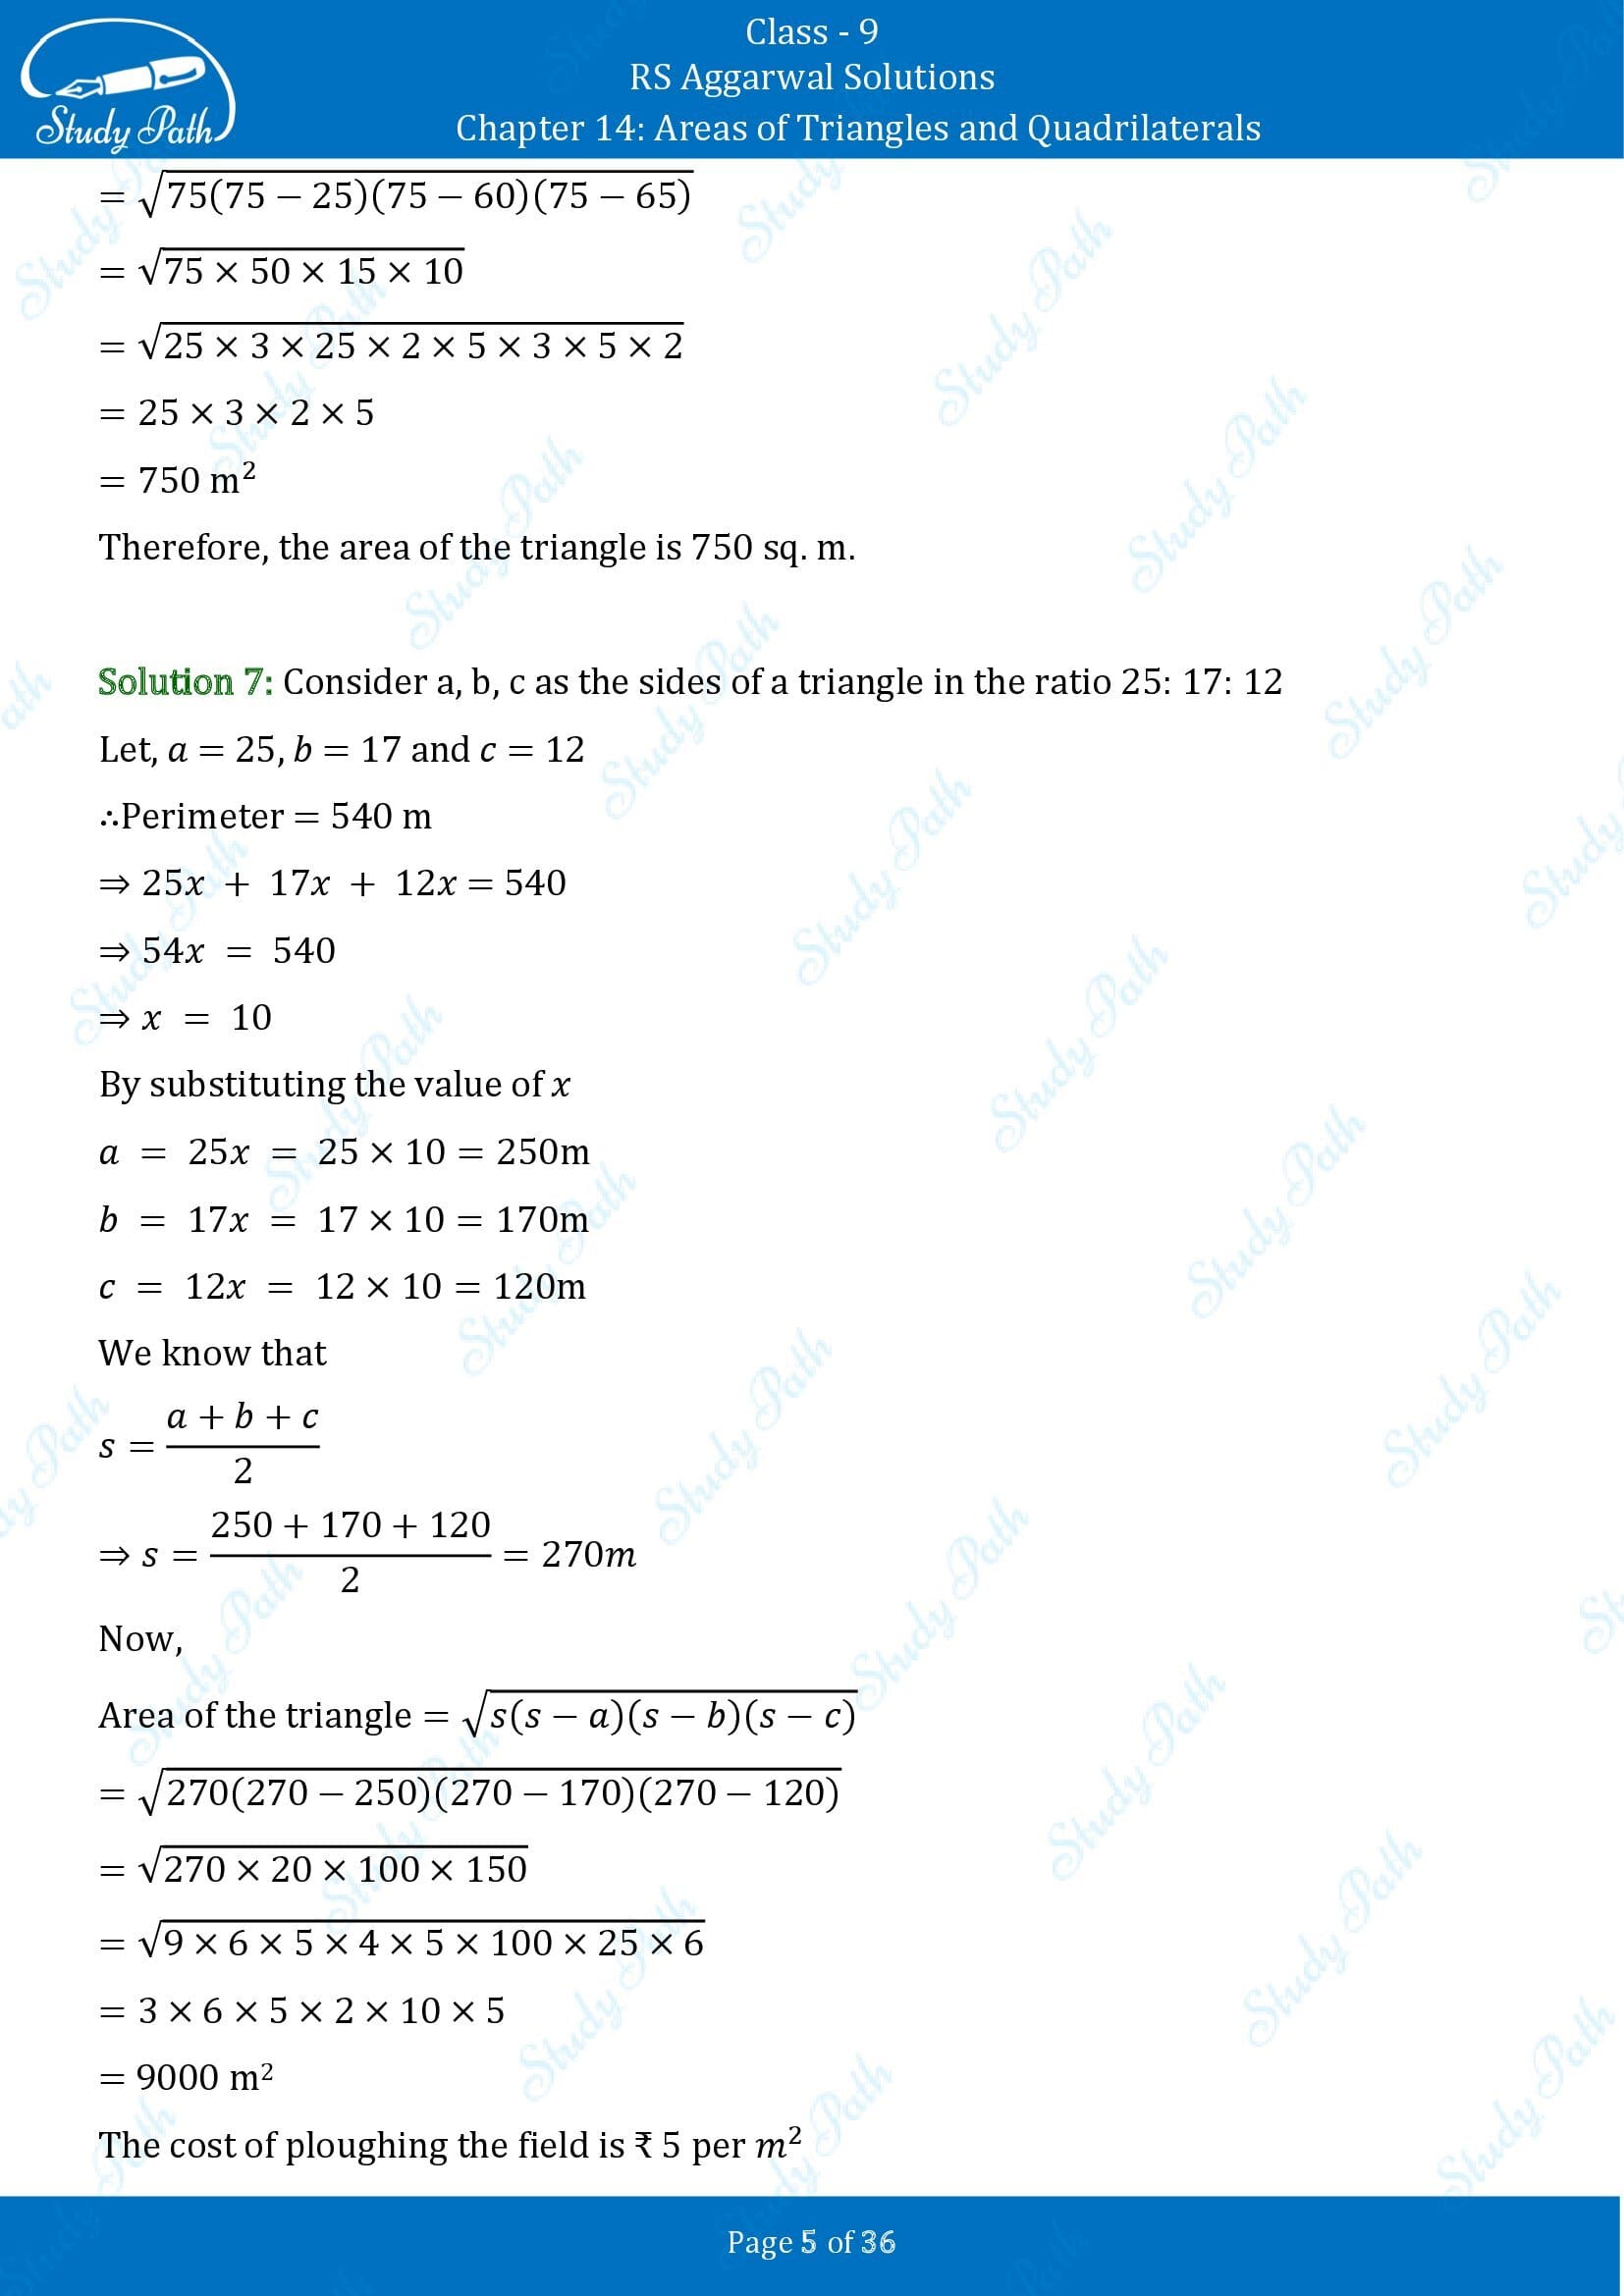 RS Aggarwal Solutions Class 9 Chapter 14 Areas of Triangles and Quadrilaterals Exercise 14 00005